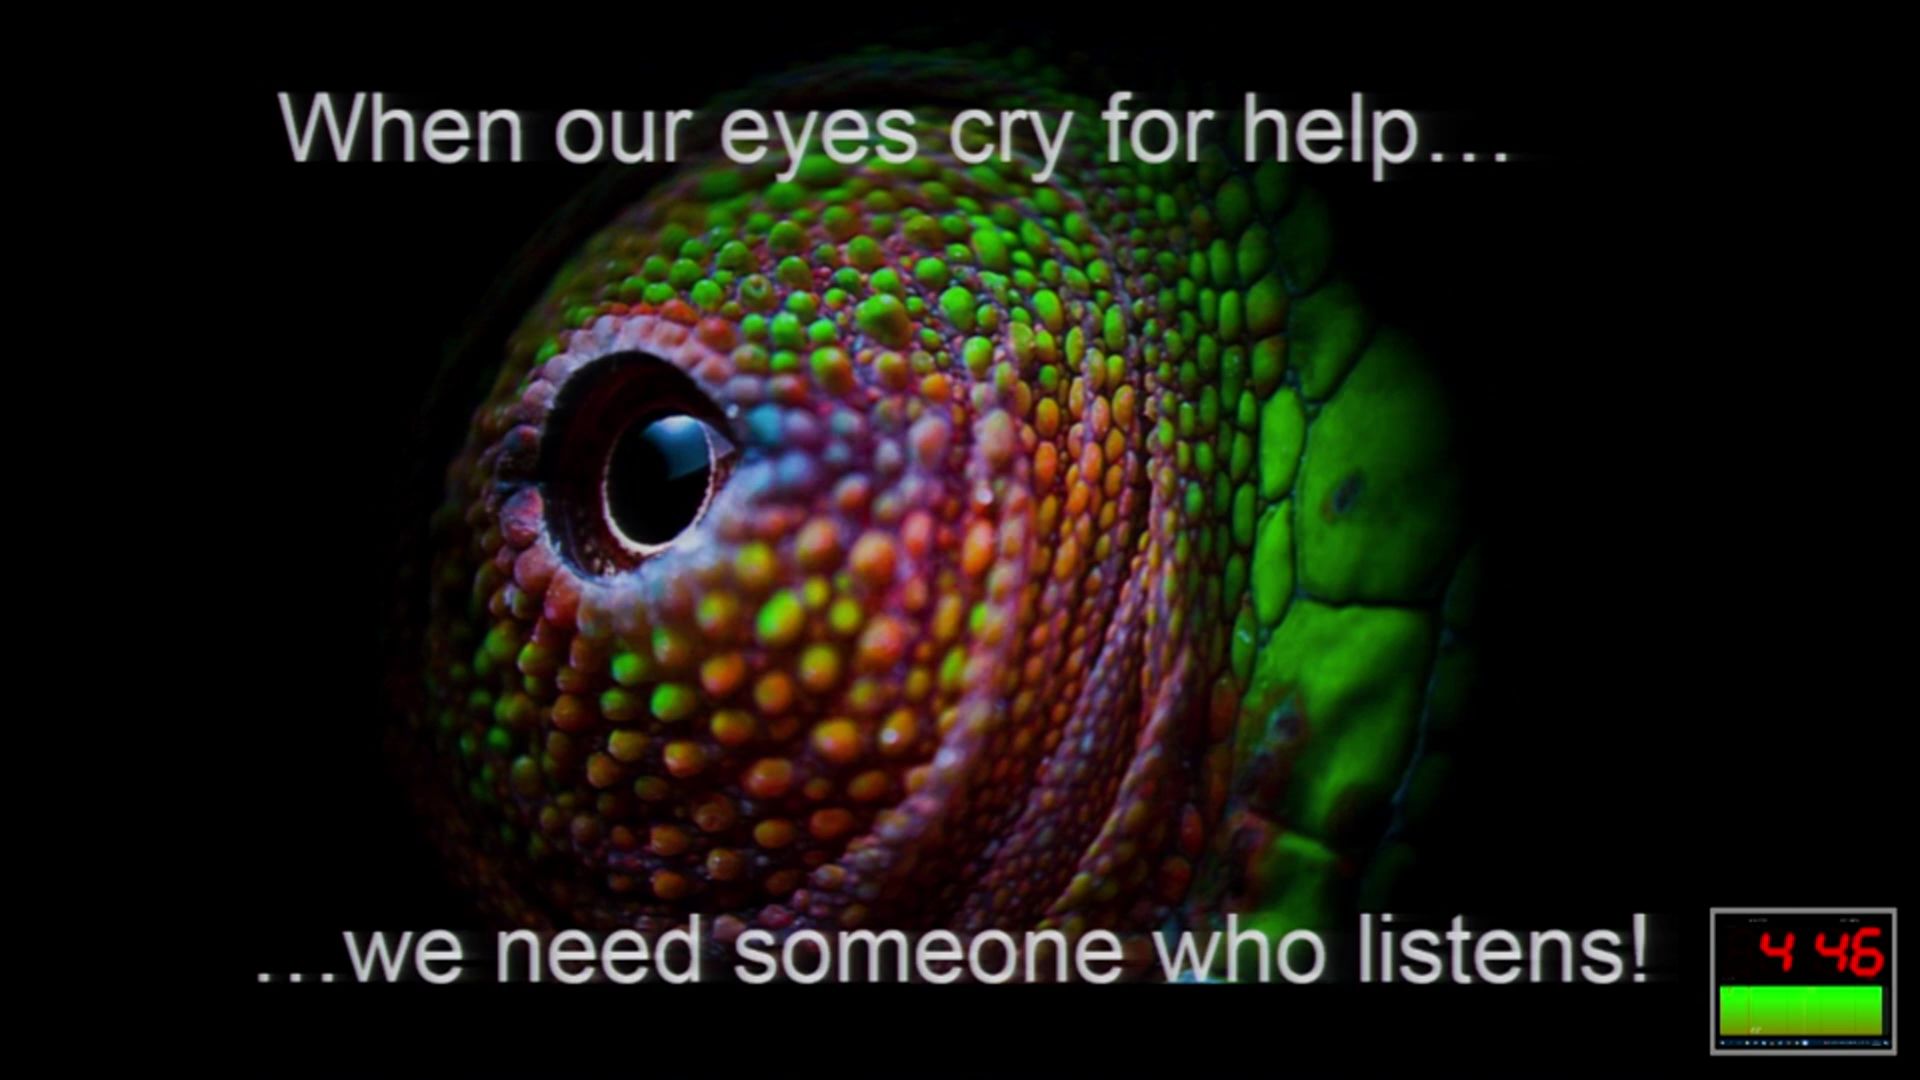 When our eyes cry for help, we need someone who listens!